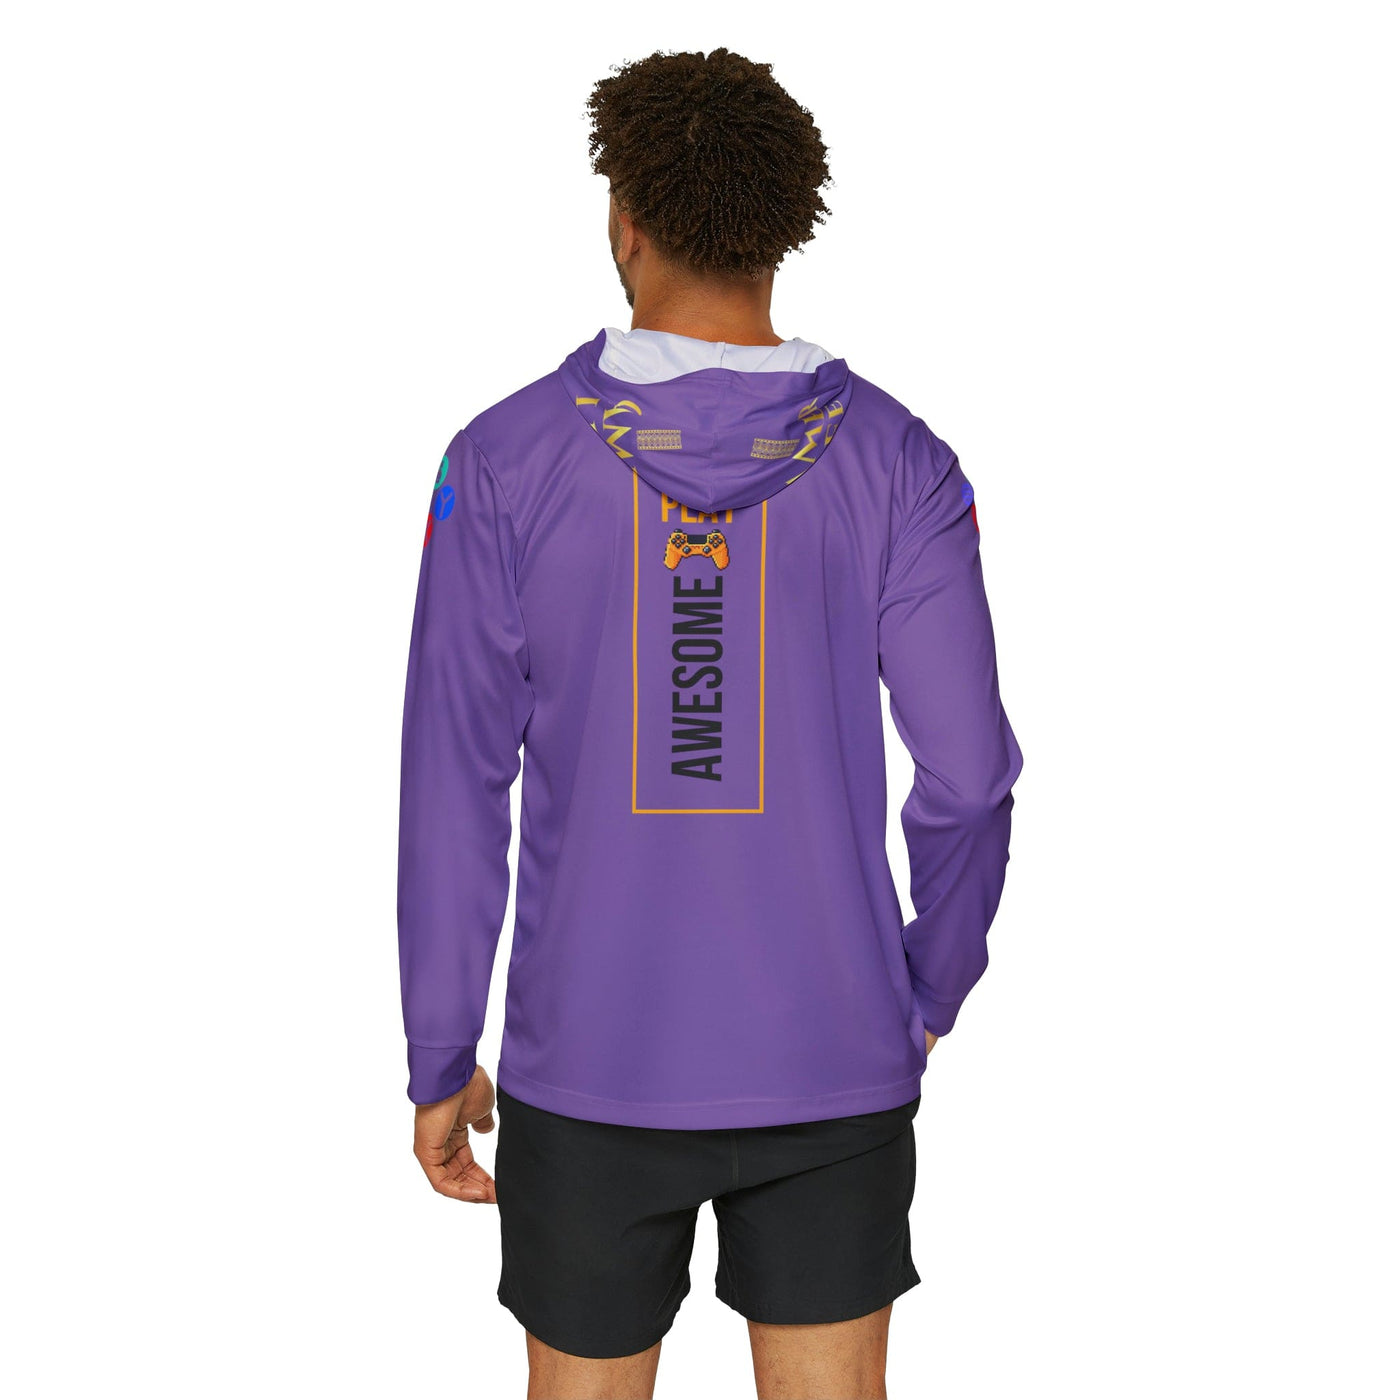 Gamer Fresh Arturo Nuro Collection | Play Awesome | Mortal Kombat 30 Year Anniversary | Raw Paw Limited Edition Tribute | Athletic Warmup Light Purple Hoodie